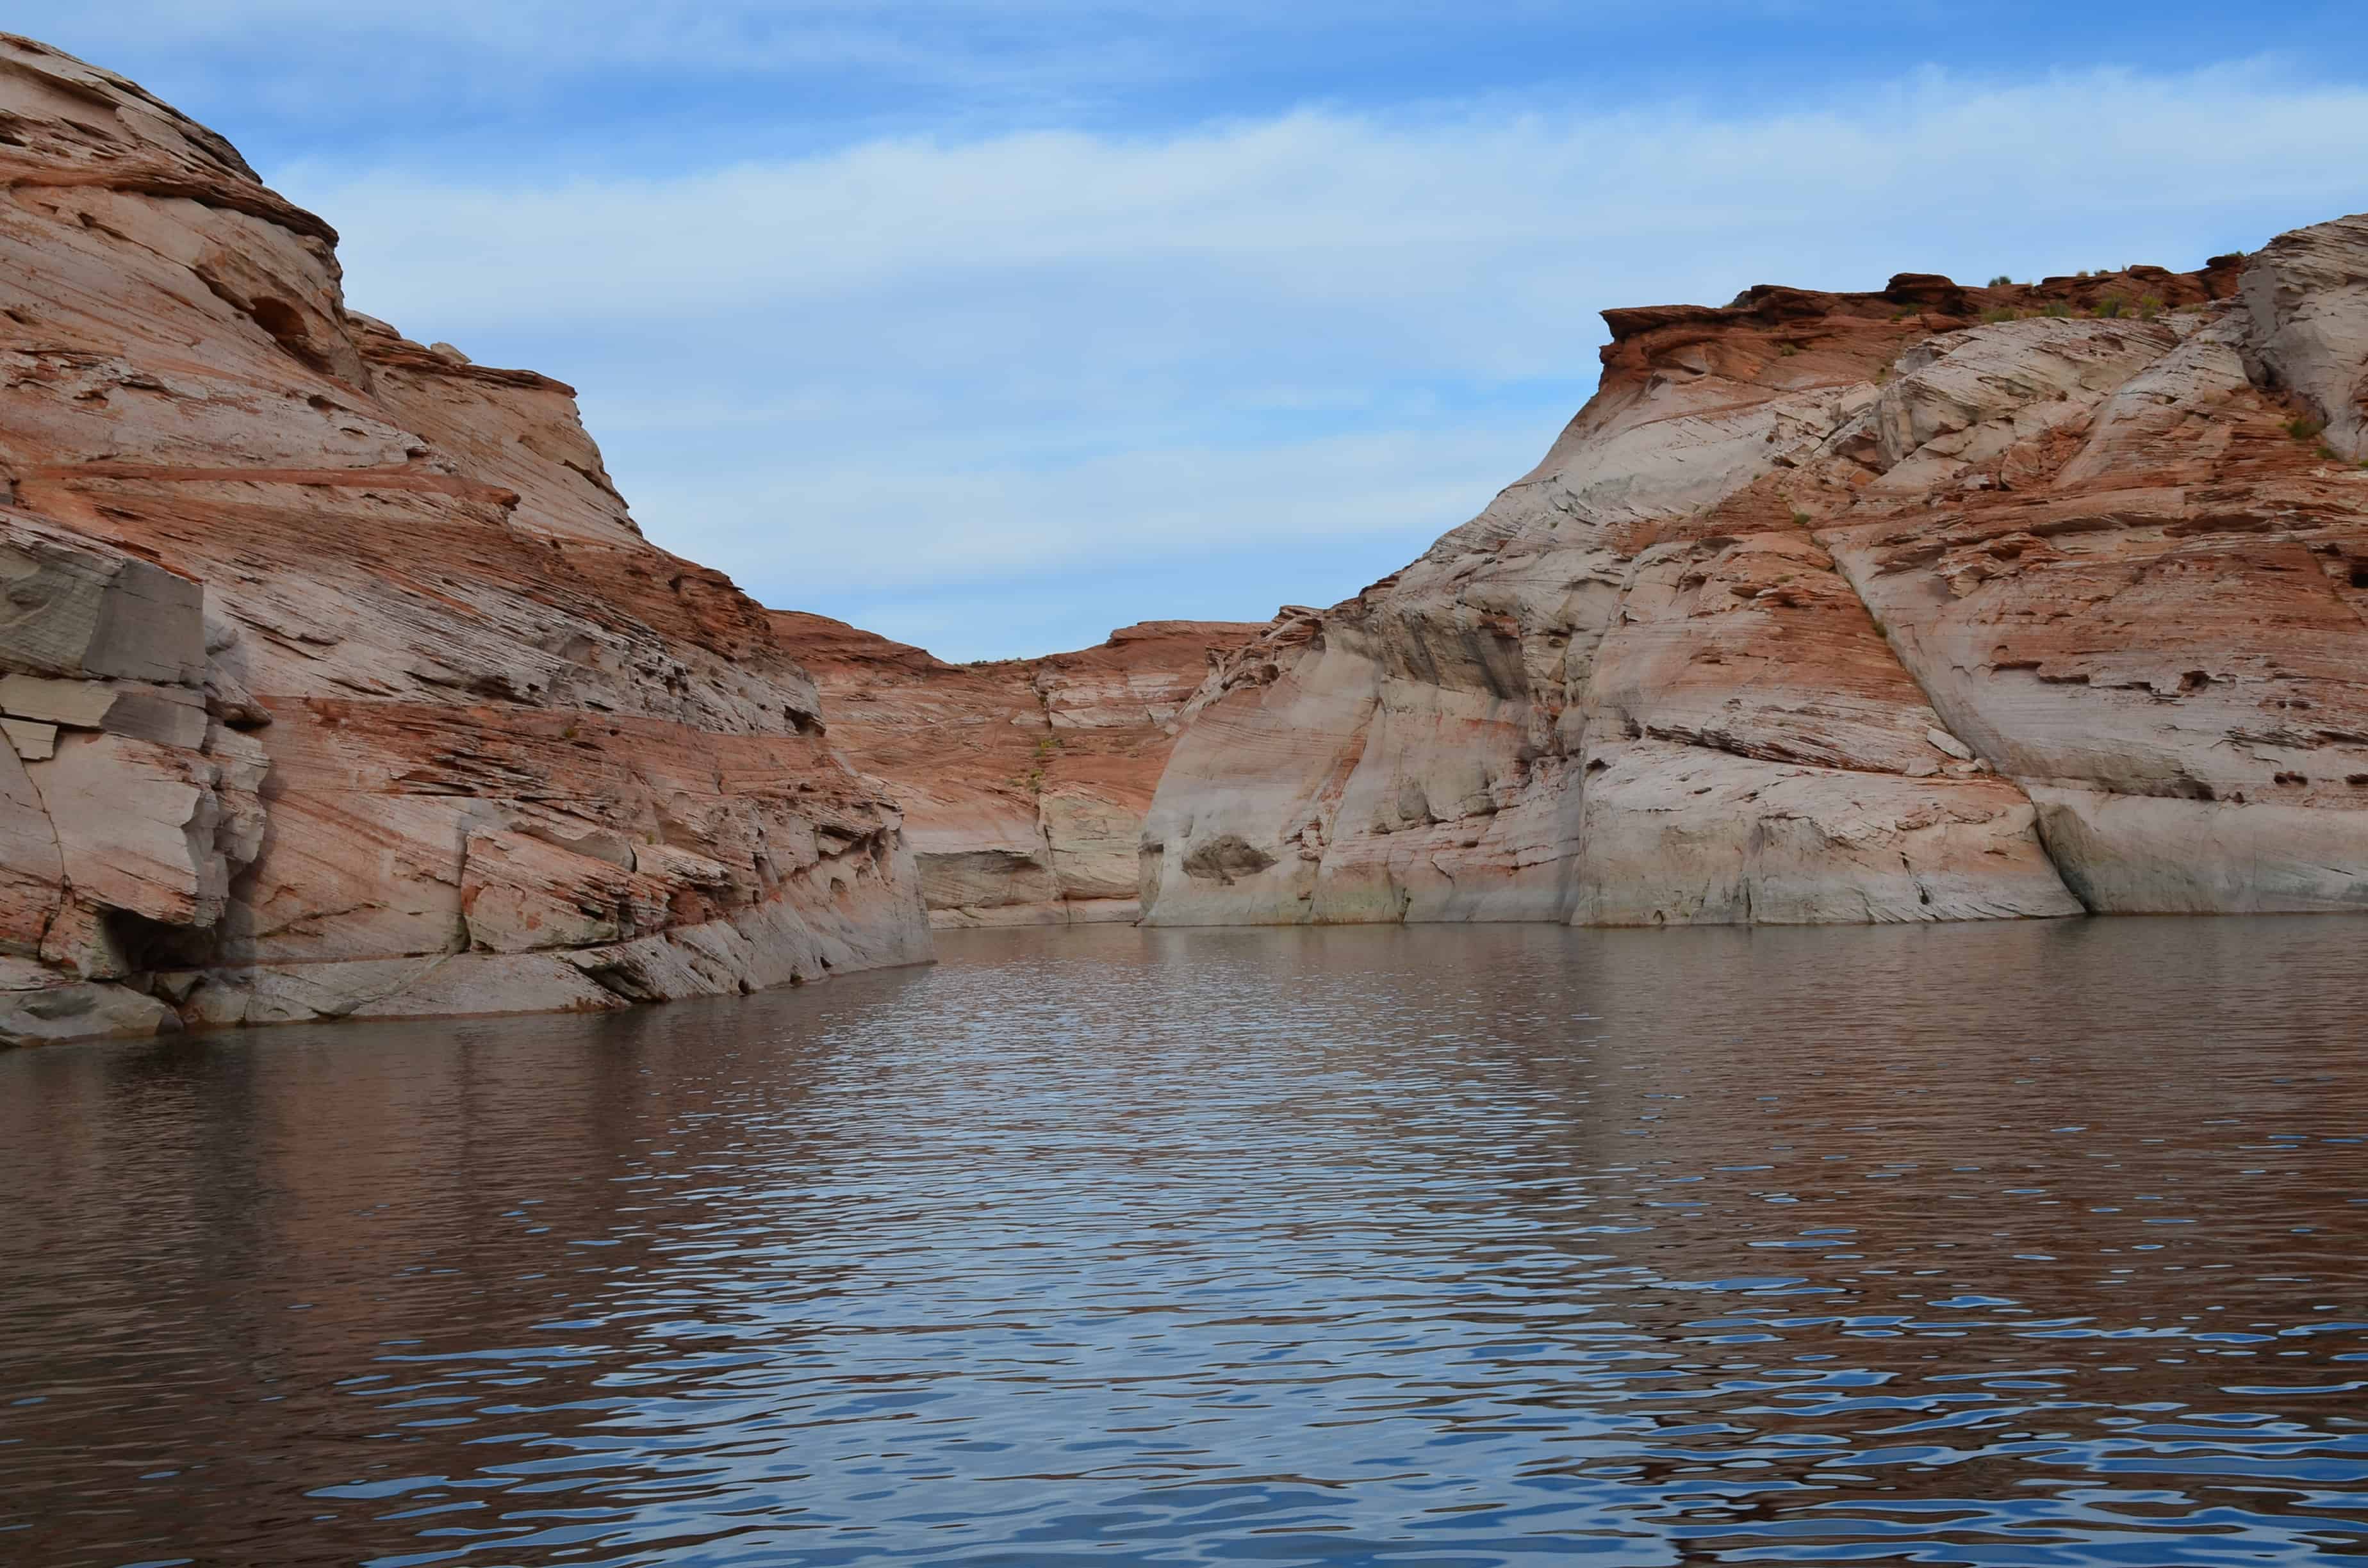 Approaching the canyon on Lake Powell at Glen Canyon National Recreation Area in Arizona